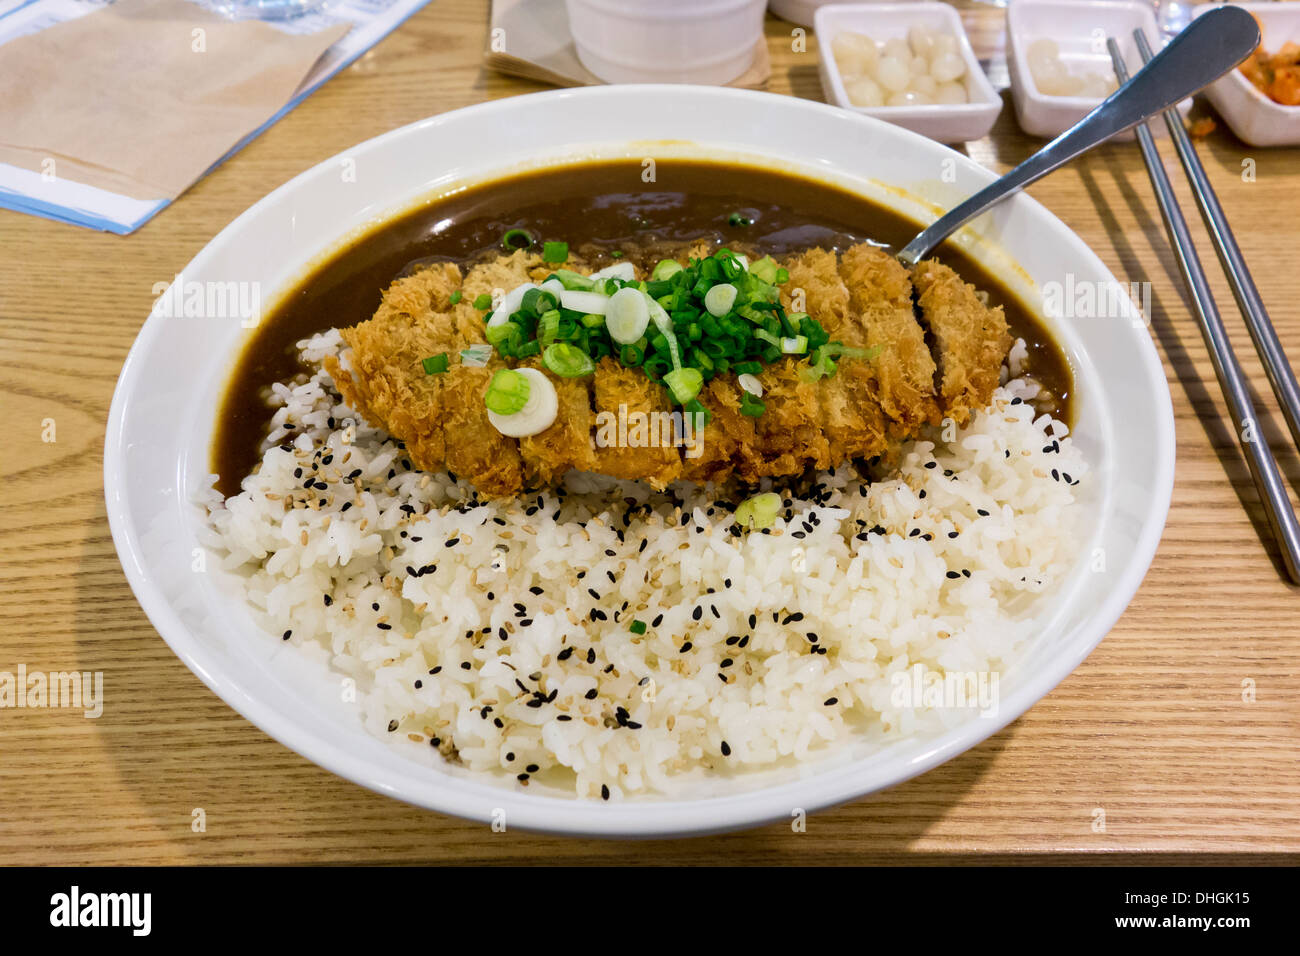 Katsu Karē is a Japanese dish comprising curry and rice served with a breaded pork cutlet on top. Stock Photo